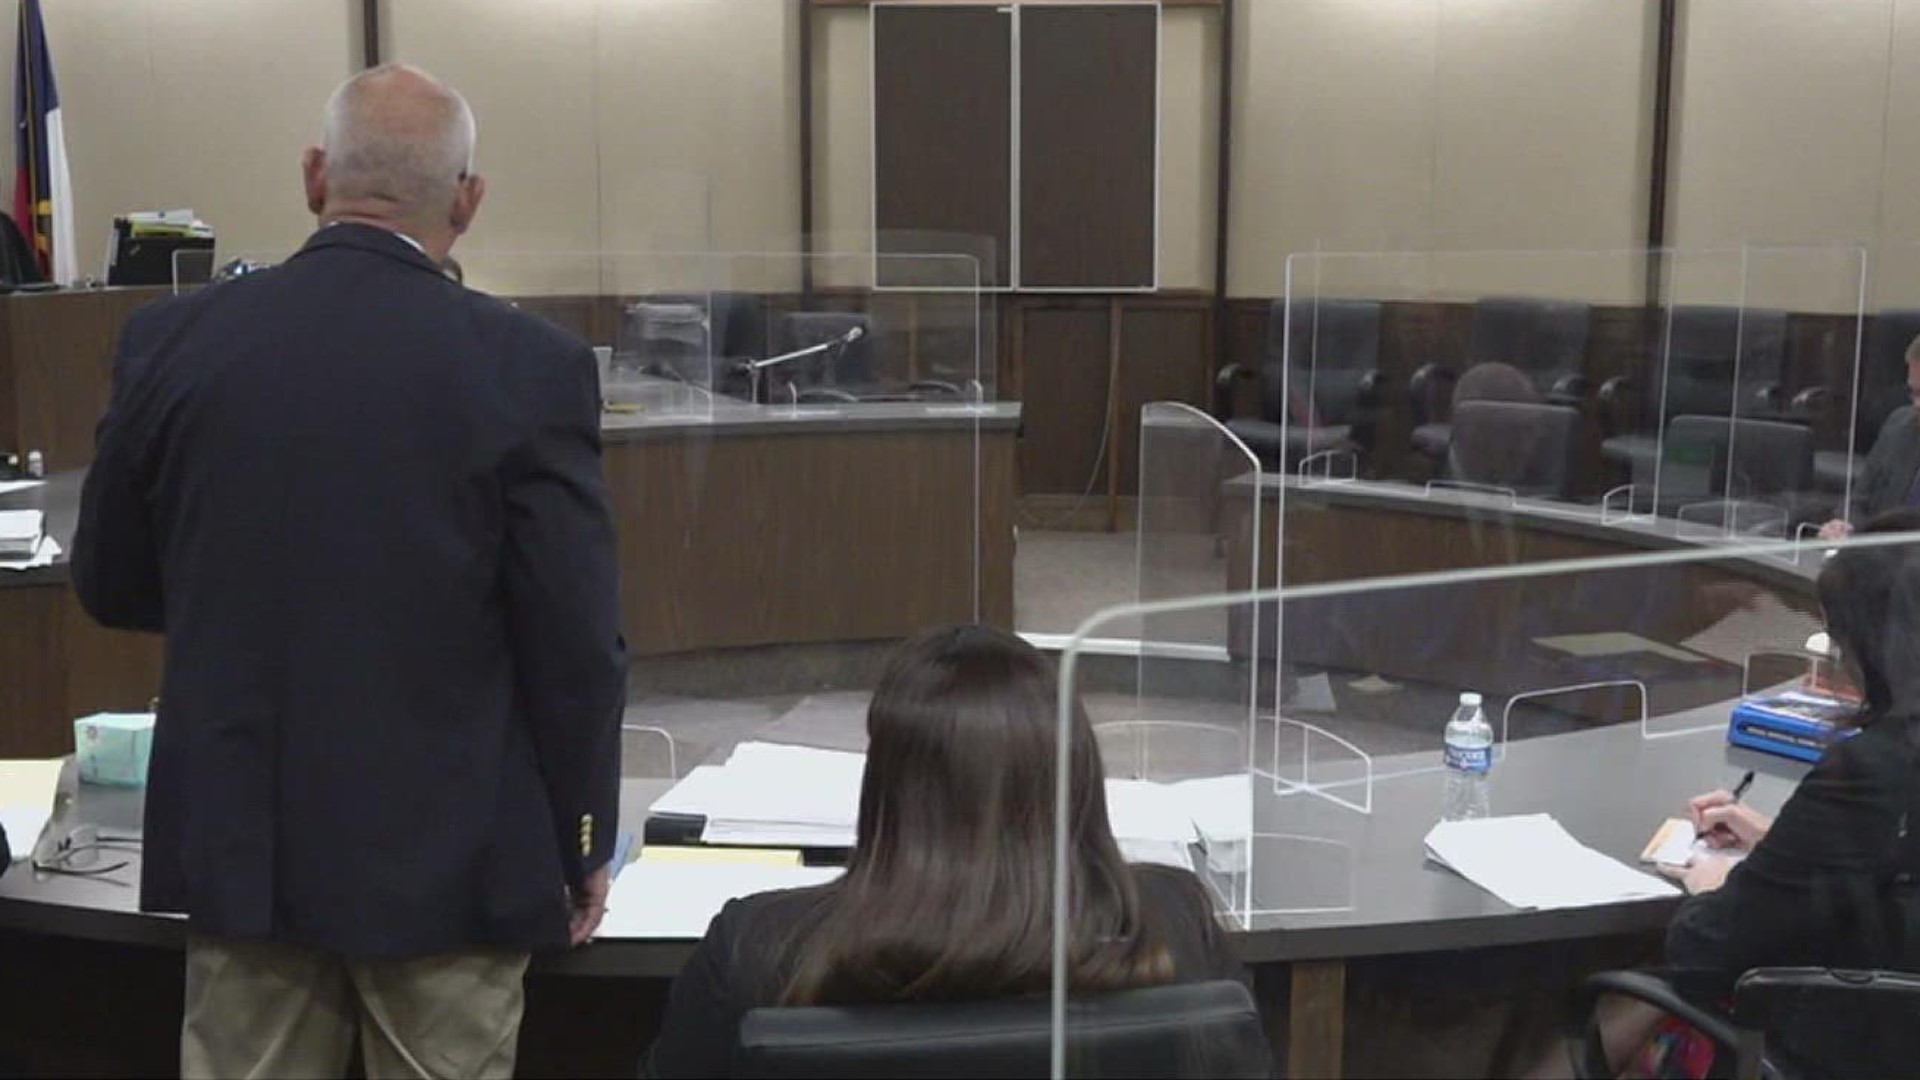 Friday the judge will be setting the capital murder trial for next January.